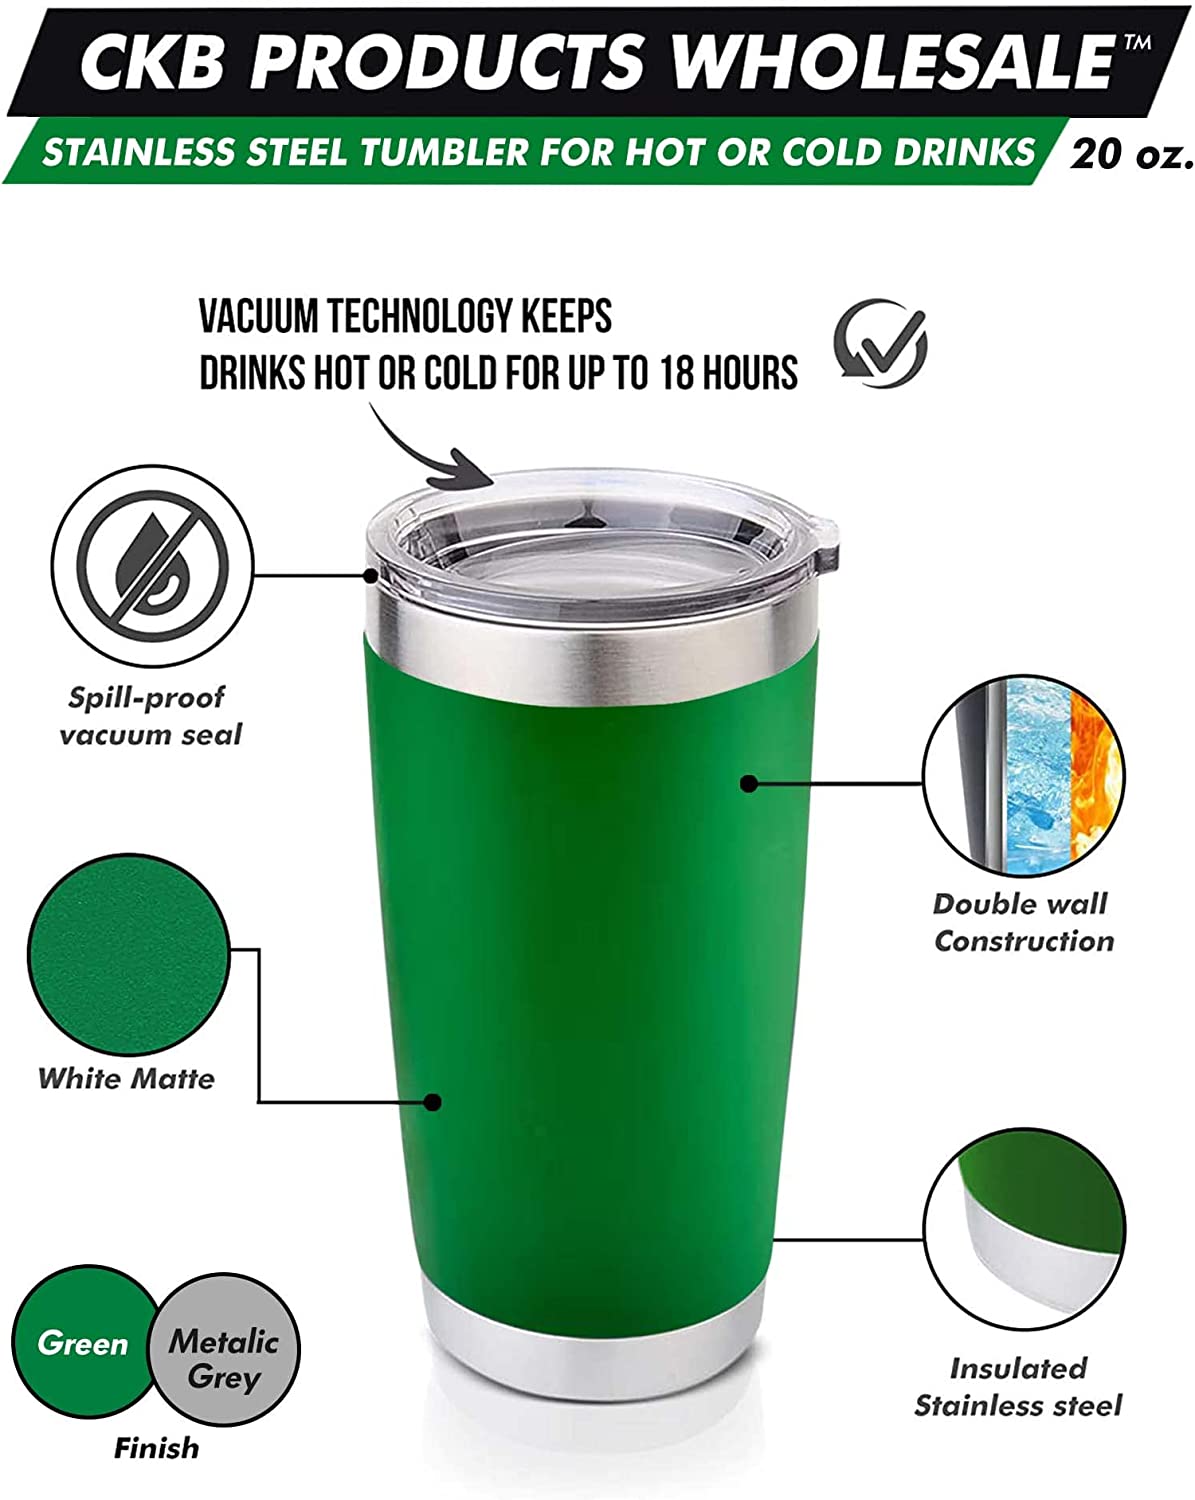 Personalized 20oz Double Wall Vacuum Tumbler with Lid - Available in Black, White, Red, Green, or Pink